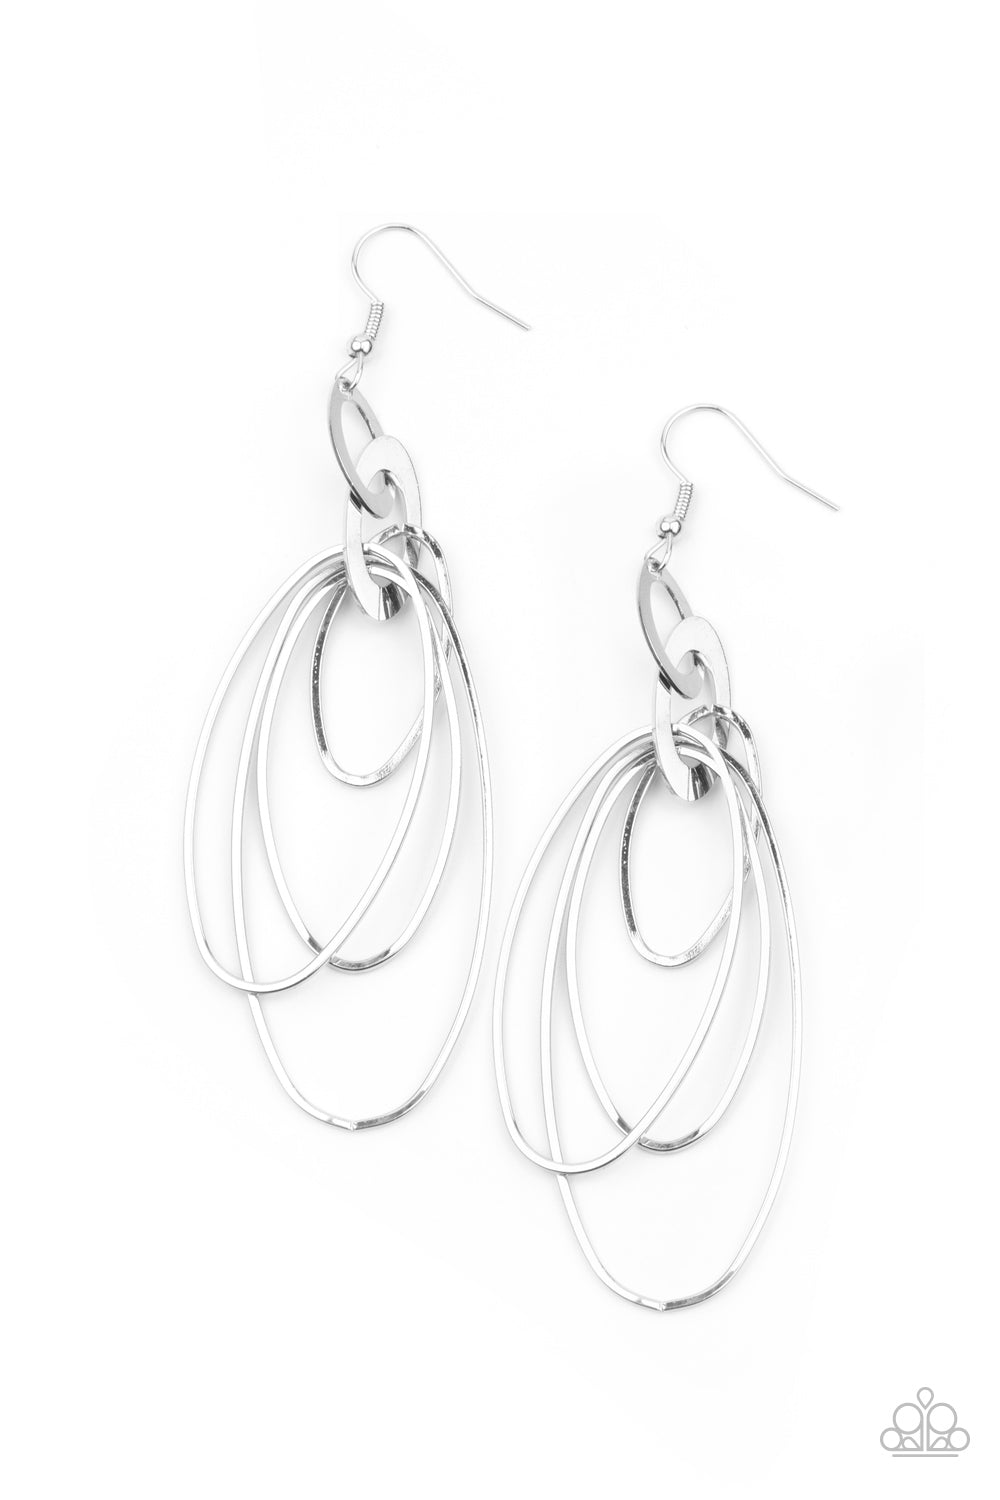 Paparazzi Accessories Oval the Moon - Silver Earrings - Lady T Accessories